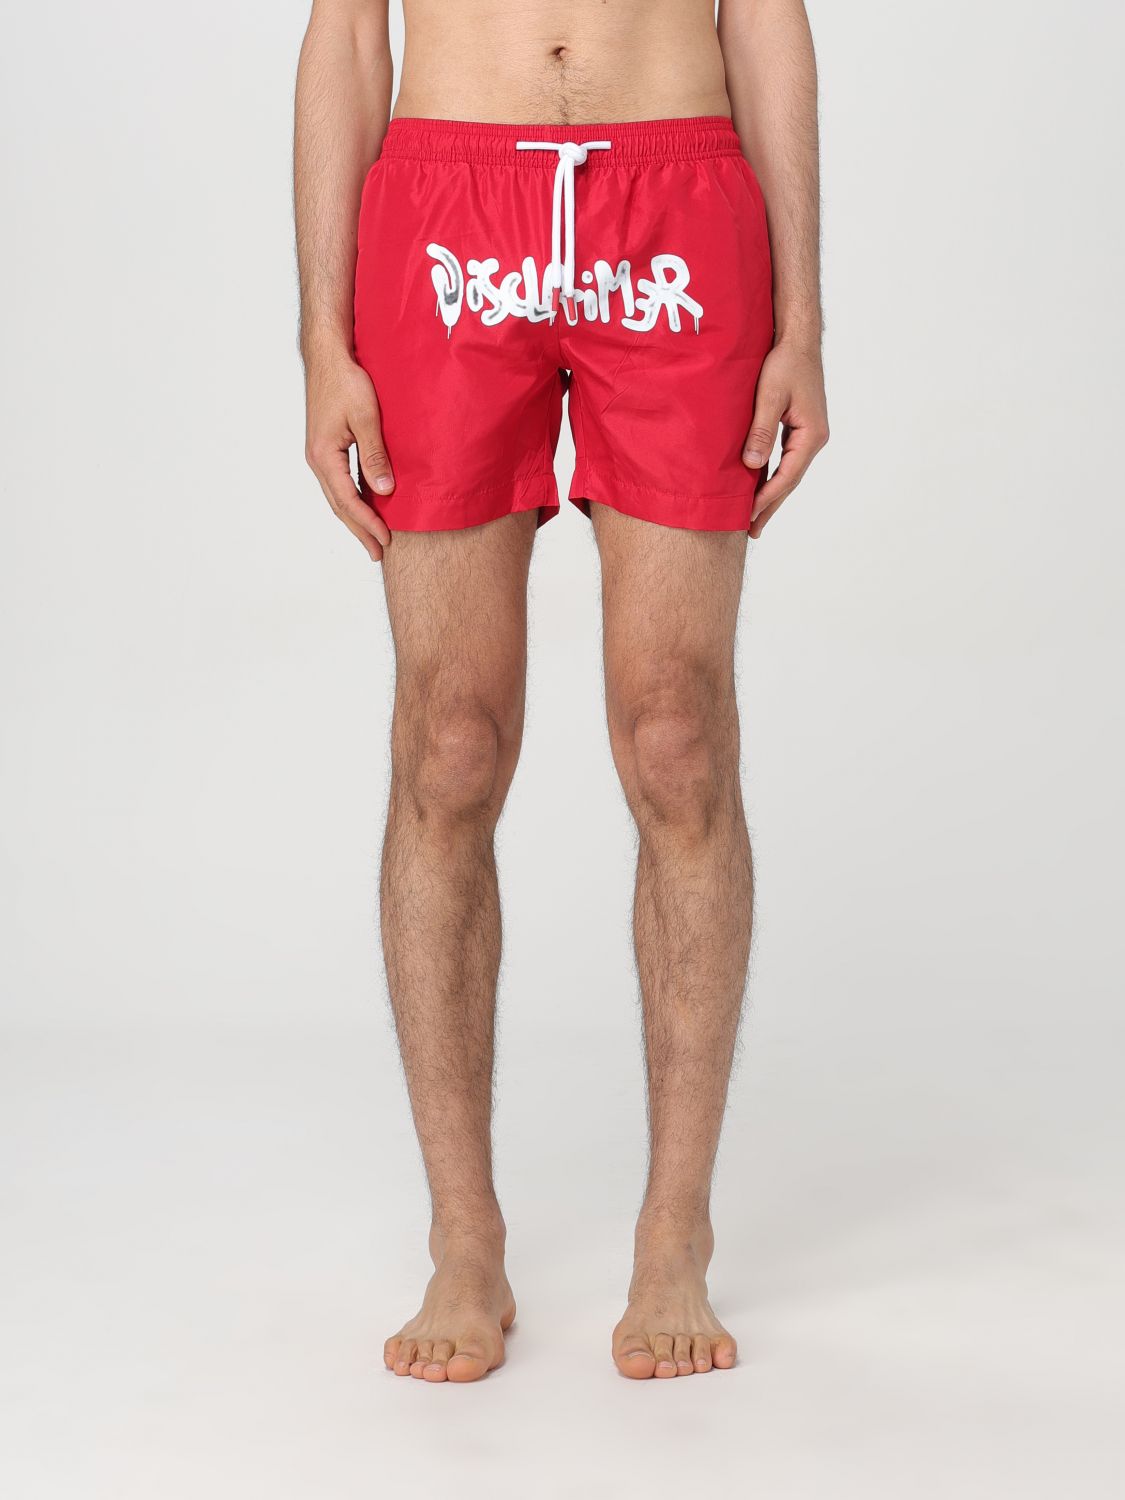 Disclaimer Swimsuit  Men Color Red